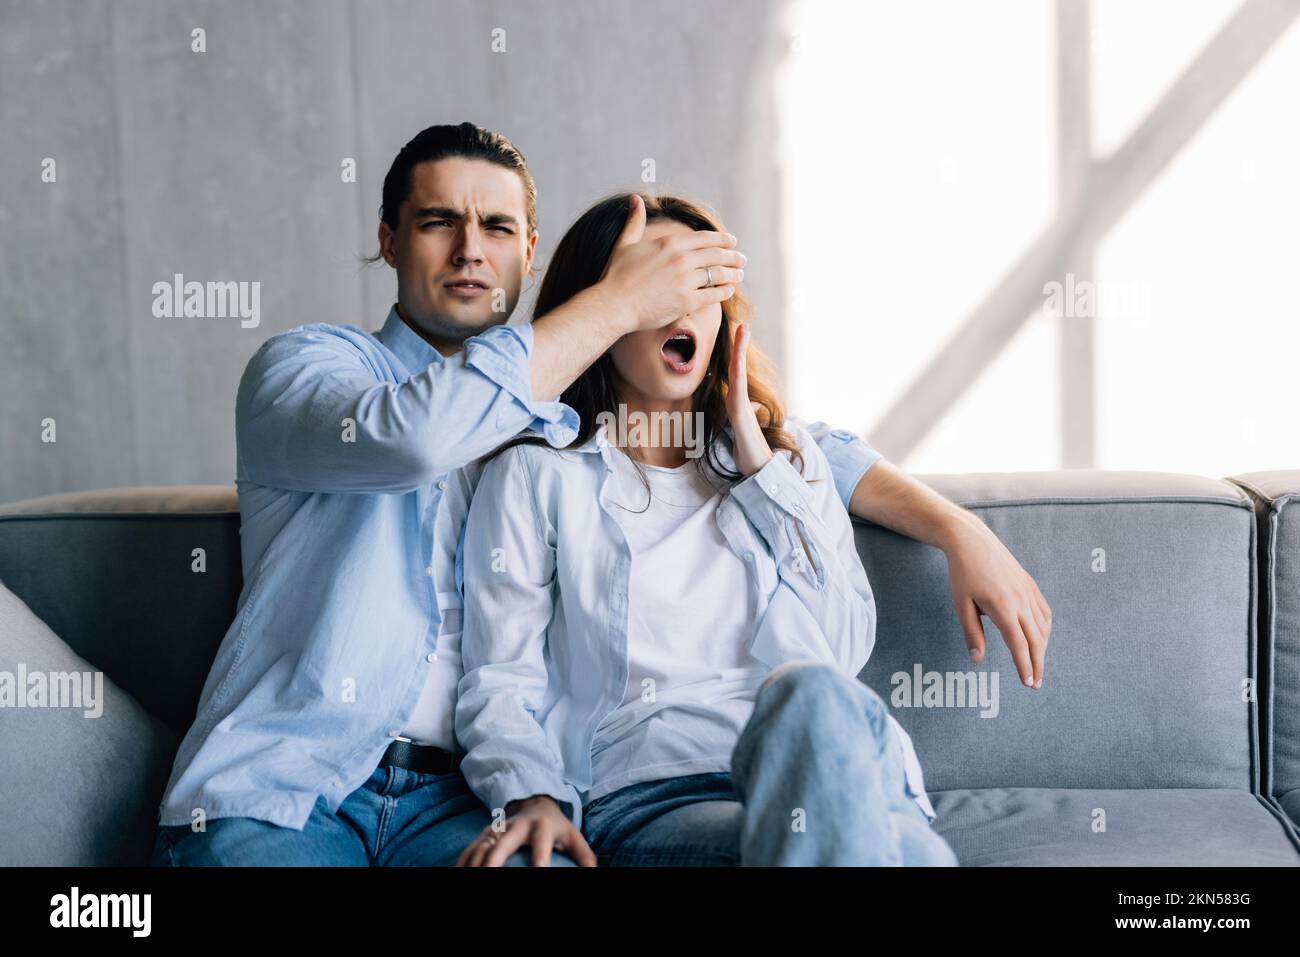 Close-up of a young man surprising woman in the living room at home Stock Photo